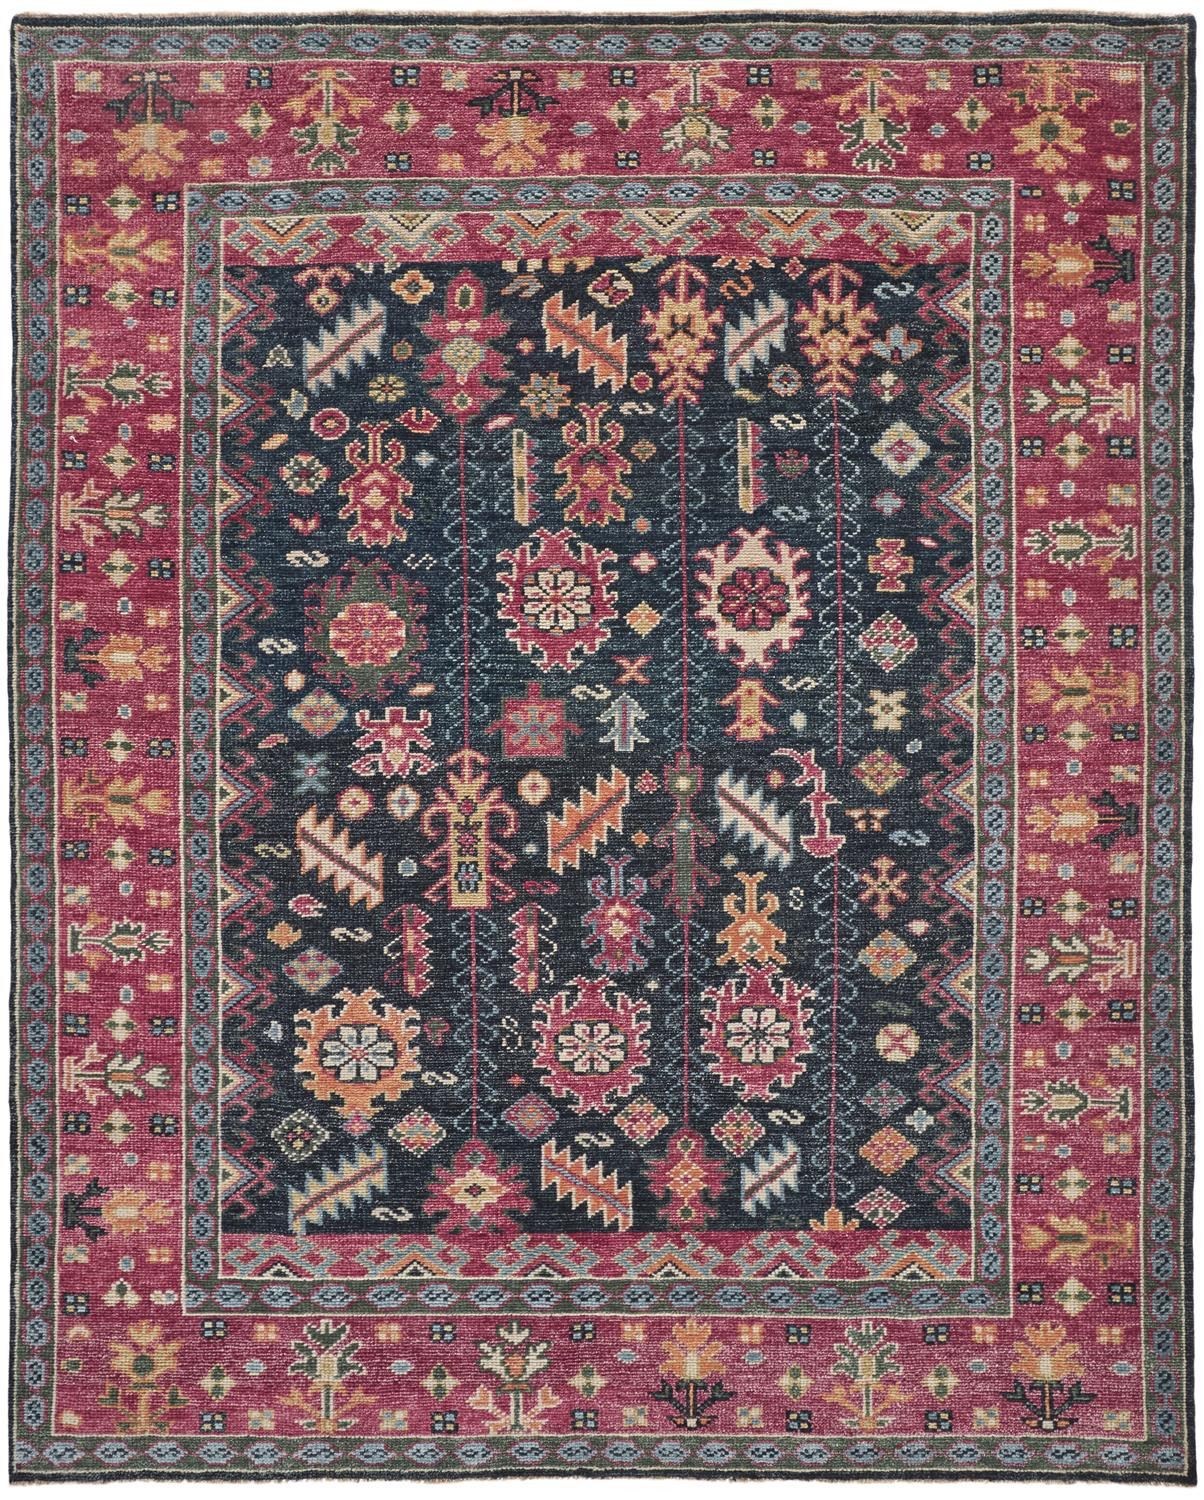 5' X 8' Pink Blue And Orange Wool Floral Hand Knotted Distressed Stain Resistant Area Rug With Fringe-511644-1